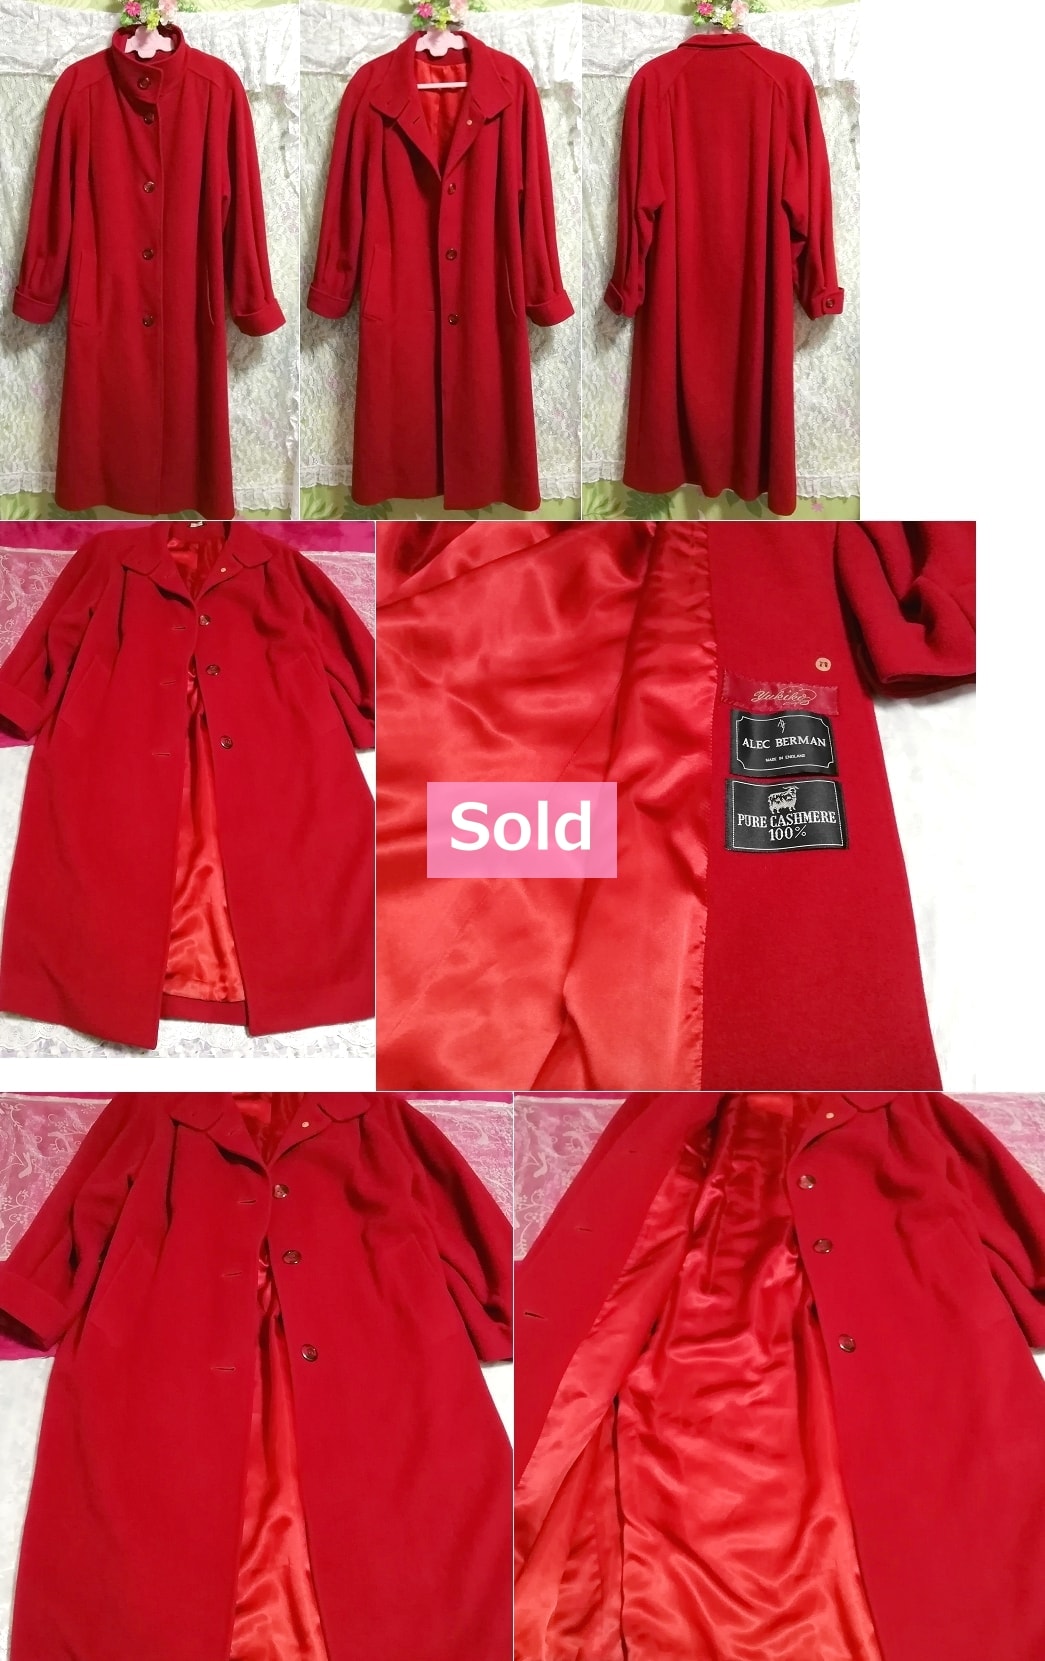 ALEC BERMAN 100% cashmere made in England UK England cashmere 100% gorgeous red long coat